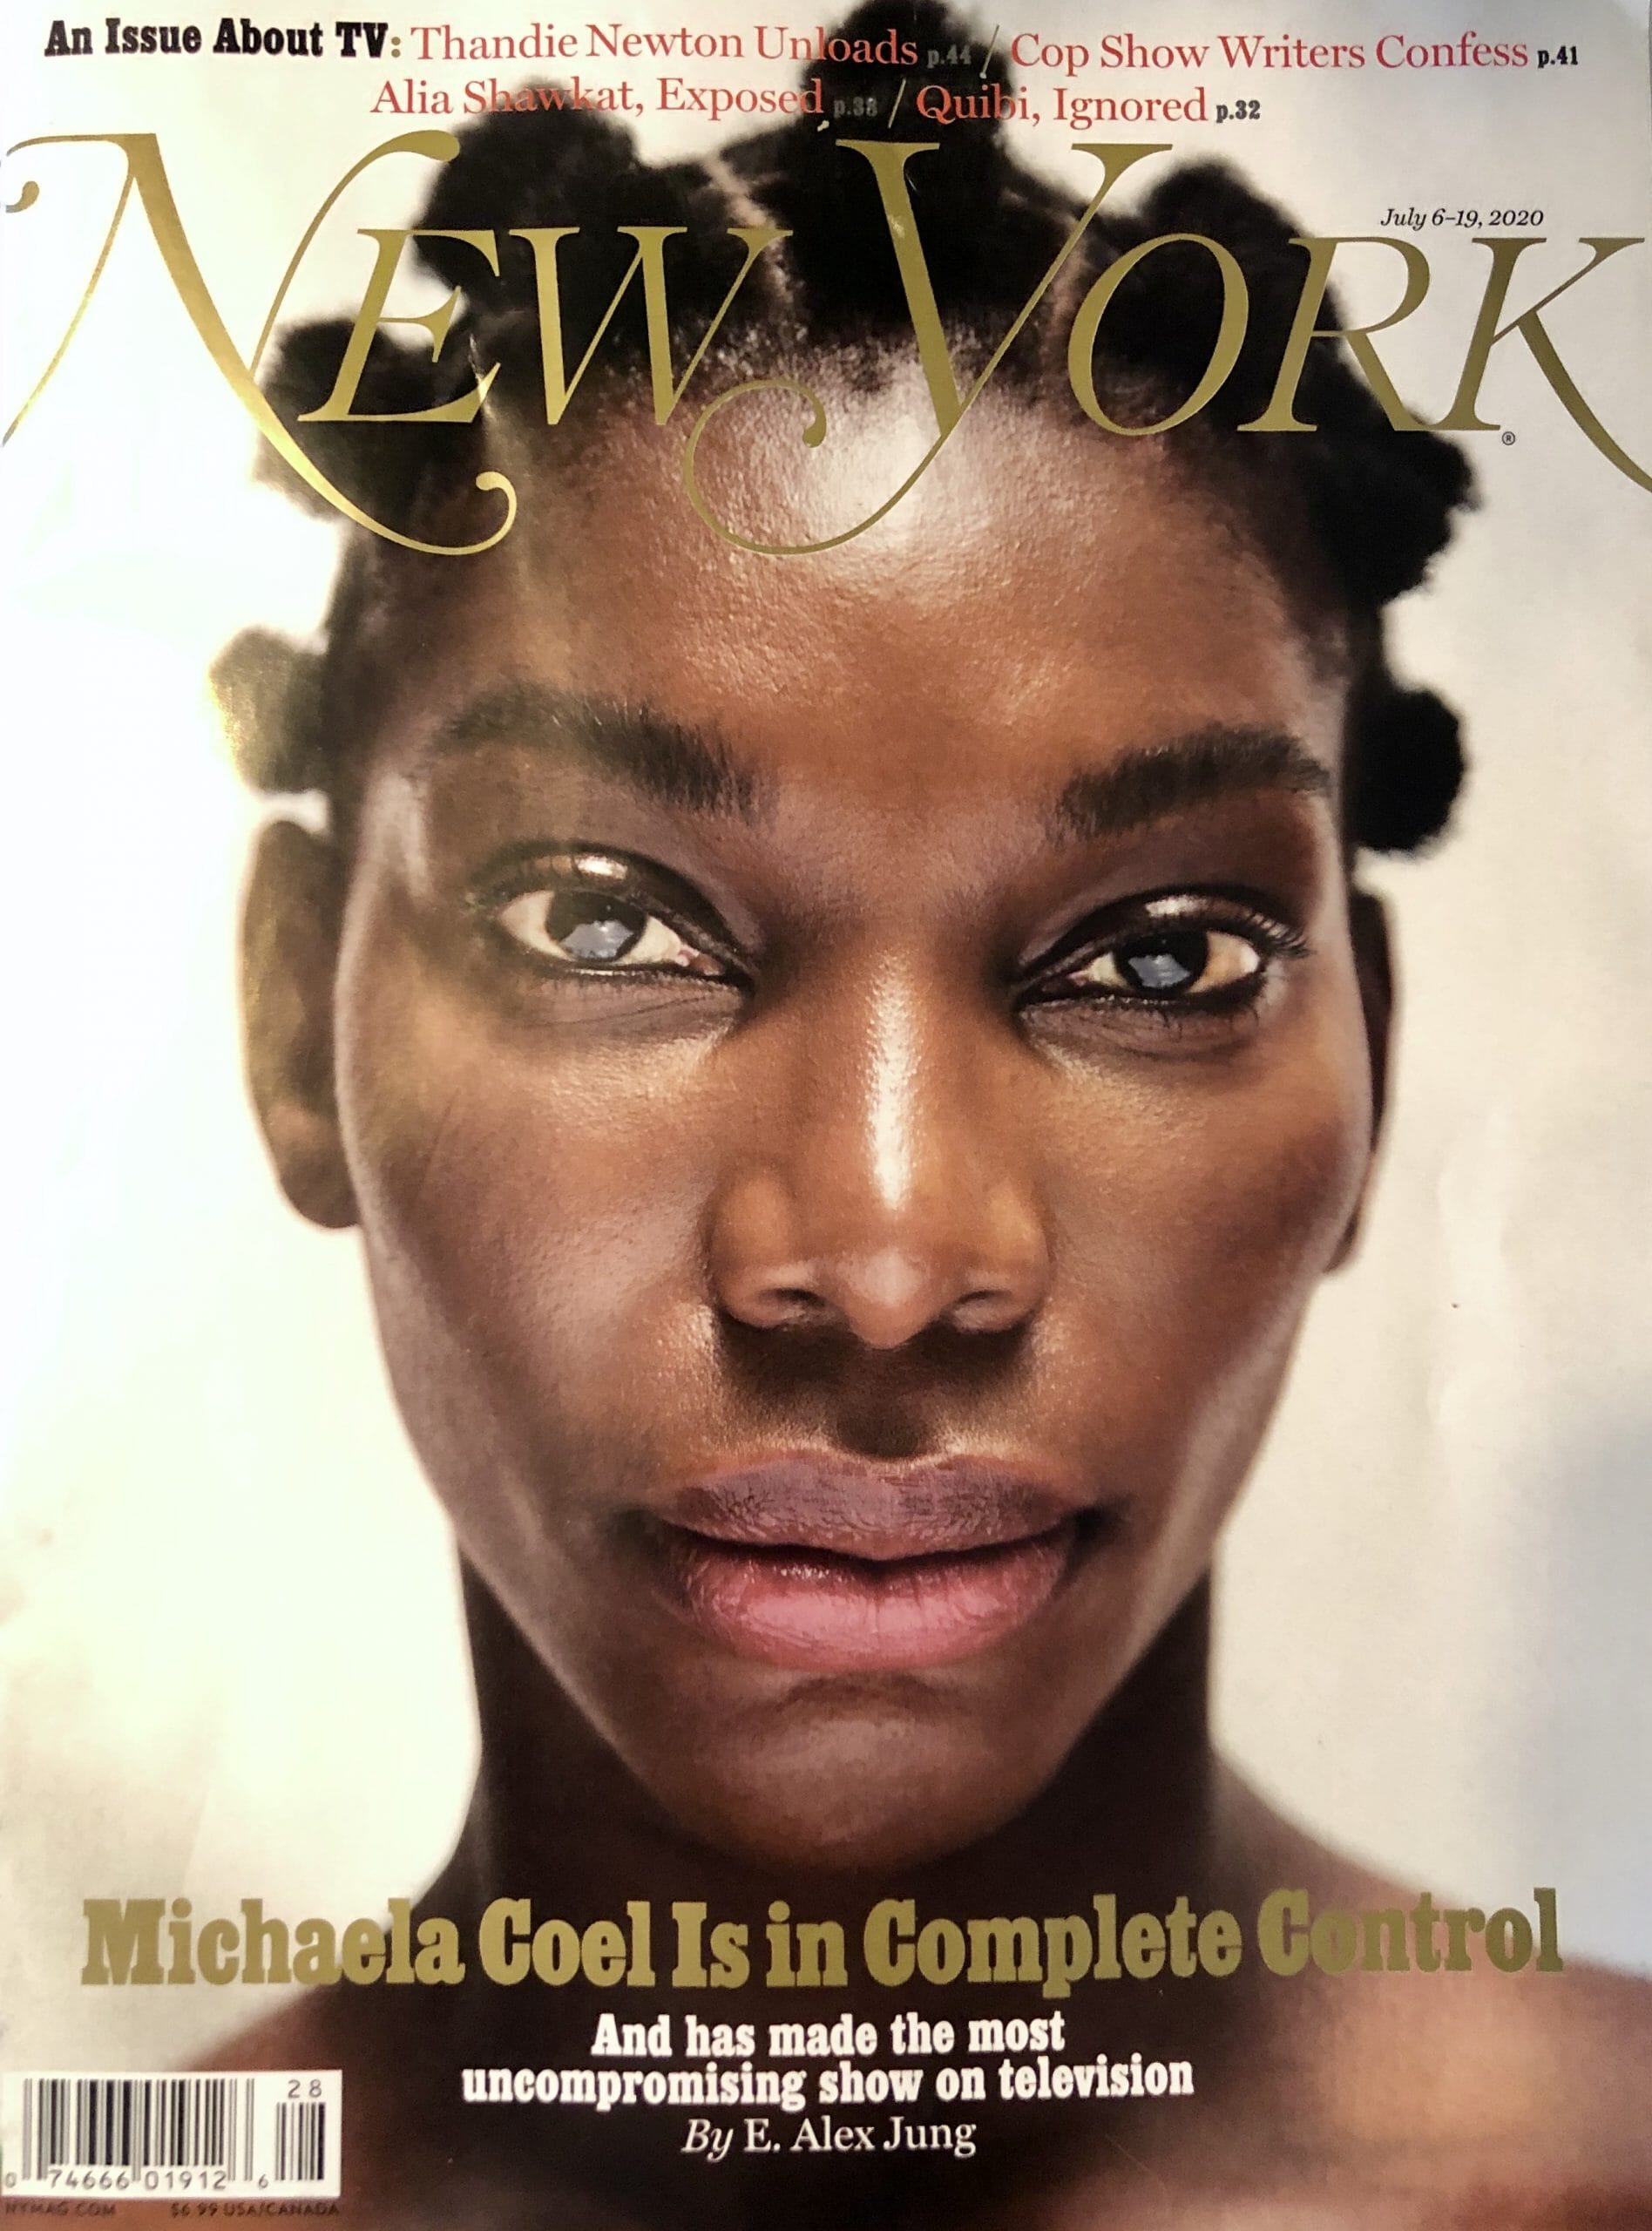 Cover of New York magazine, July 2020